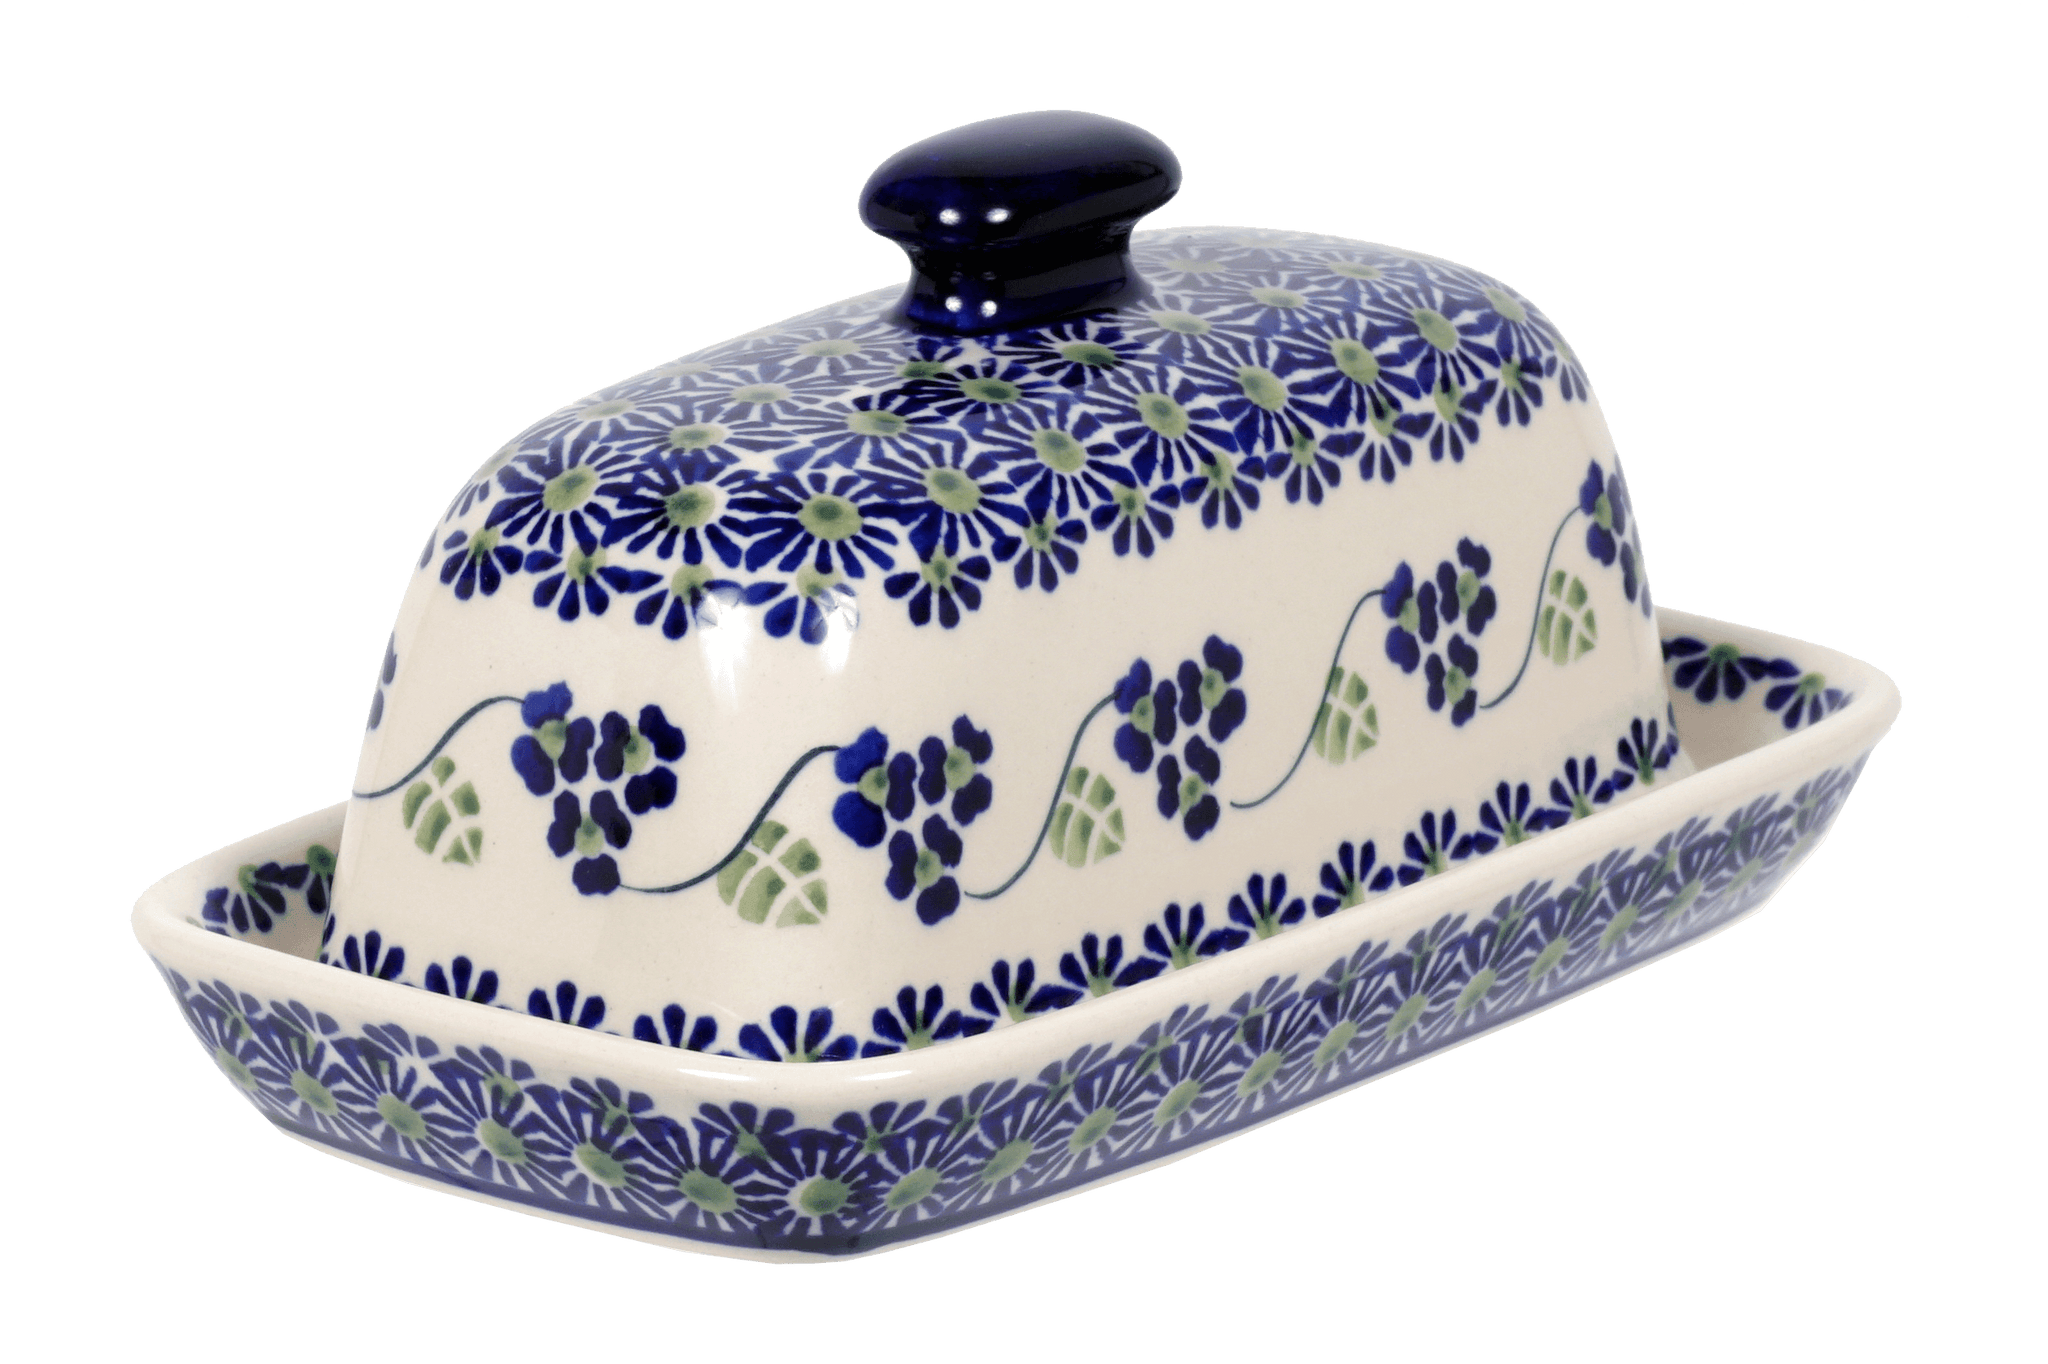 American Butter Dish (Holiday Cheer)  M074T-NOS2 - The Polish Pottery  Outlet